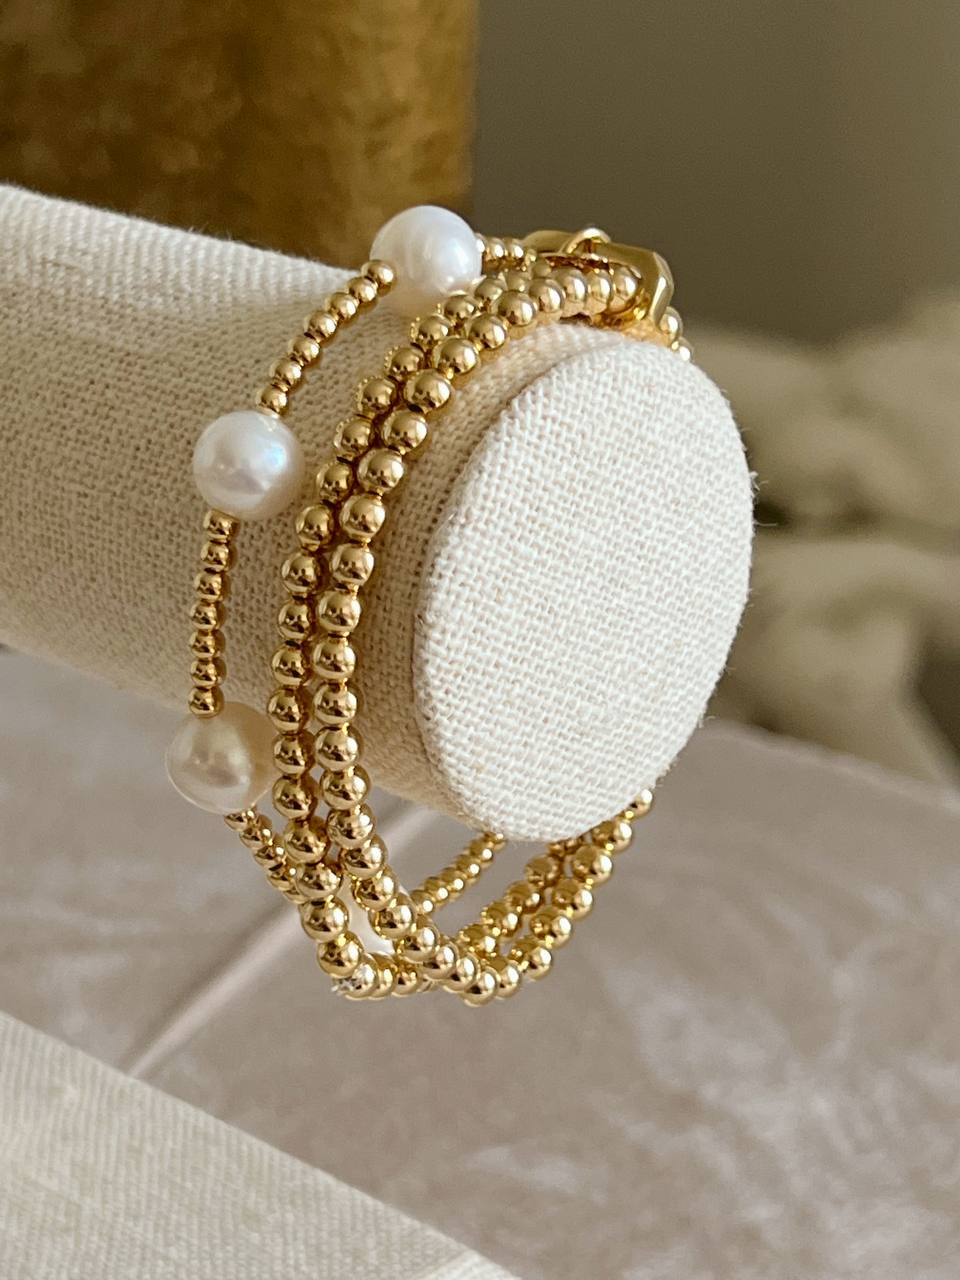 Bracelet of 3 with gold balls and pearls